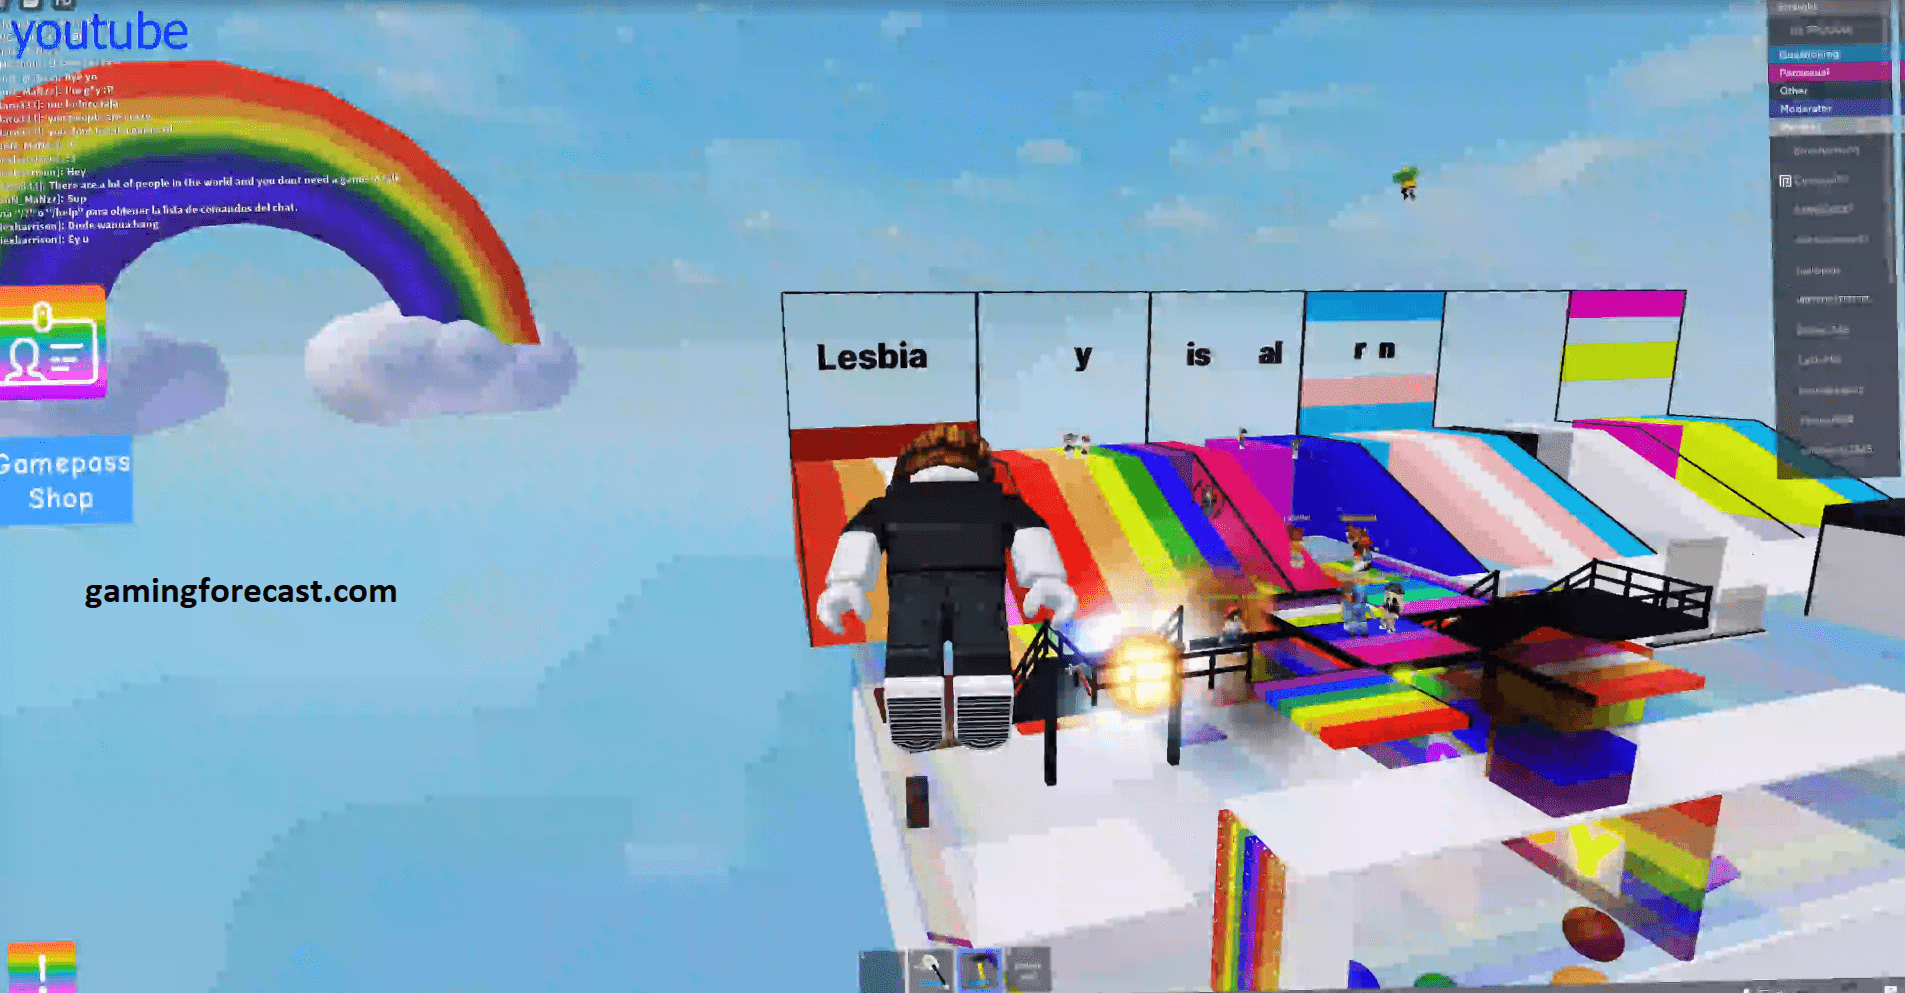 Roblox Hack Download Pc Destroy Lobby Fly Aimbot Scripts 2021 Gaming Forecast Download Free Online Game Hacks - roblox baixar pc gratis